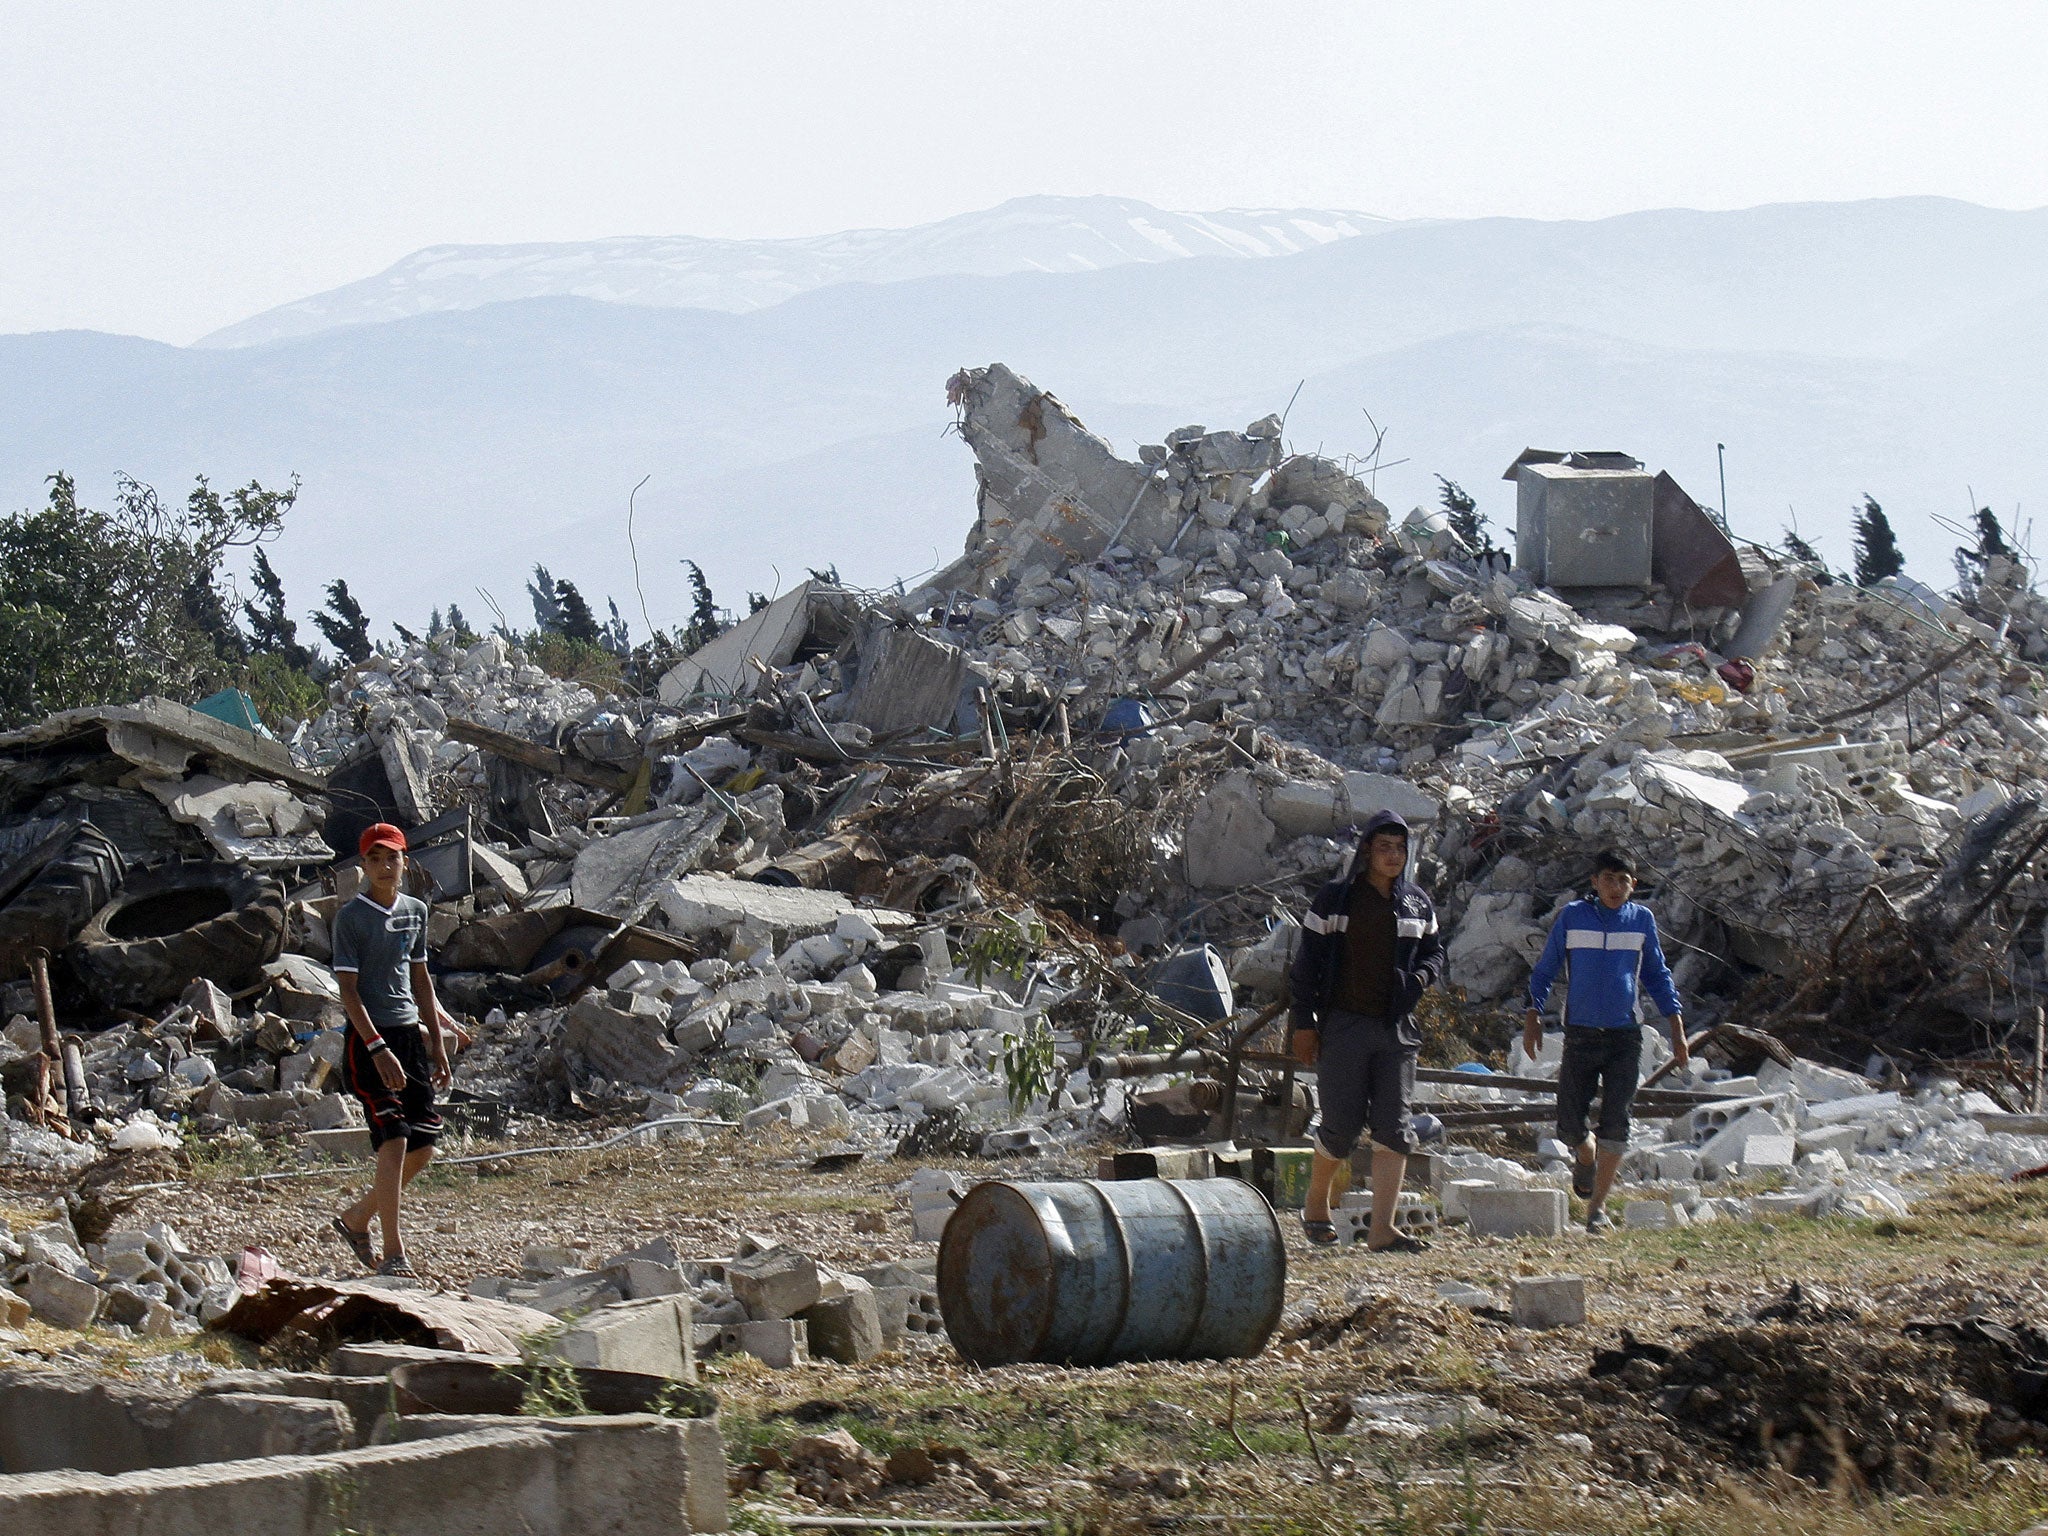 Syrian youths walk amongst the rubble in the village of al-Hamidiyeh, north of Qusayr, in Homs province